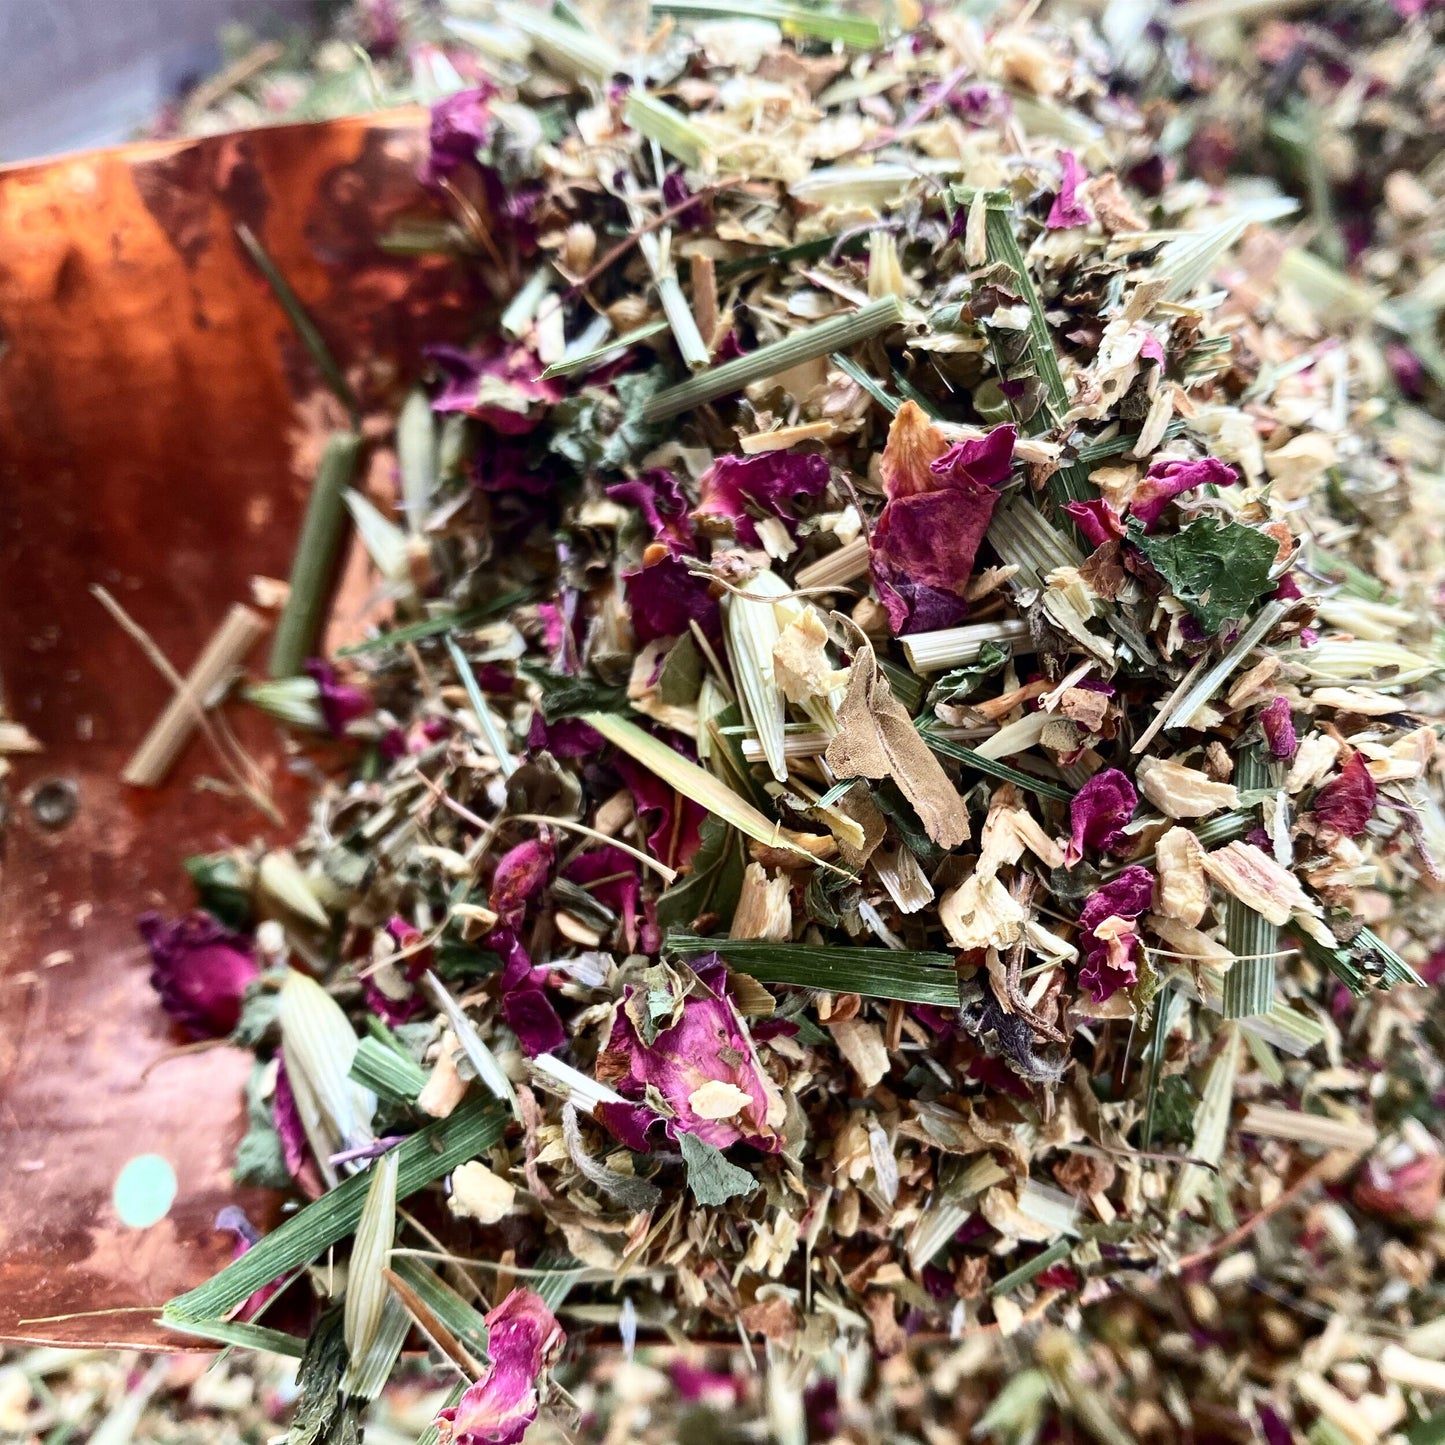 Earth Centered Tea by Two Spirit Medicinals 1 oz. - Moon Room Shop and Wellness